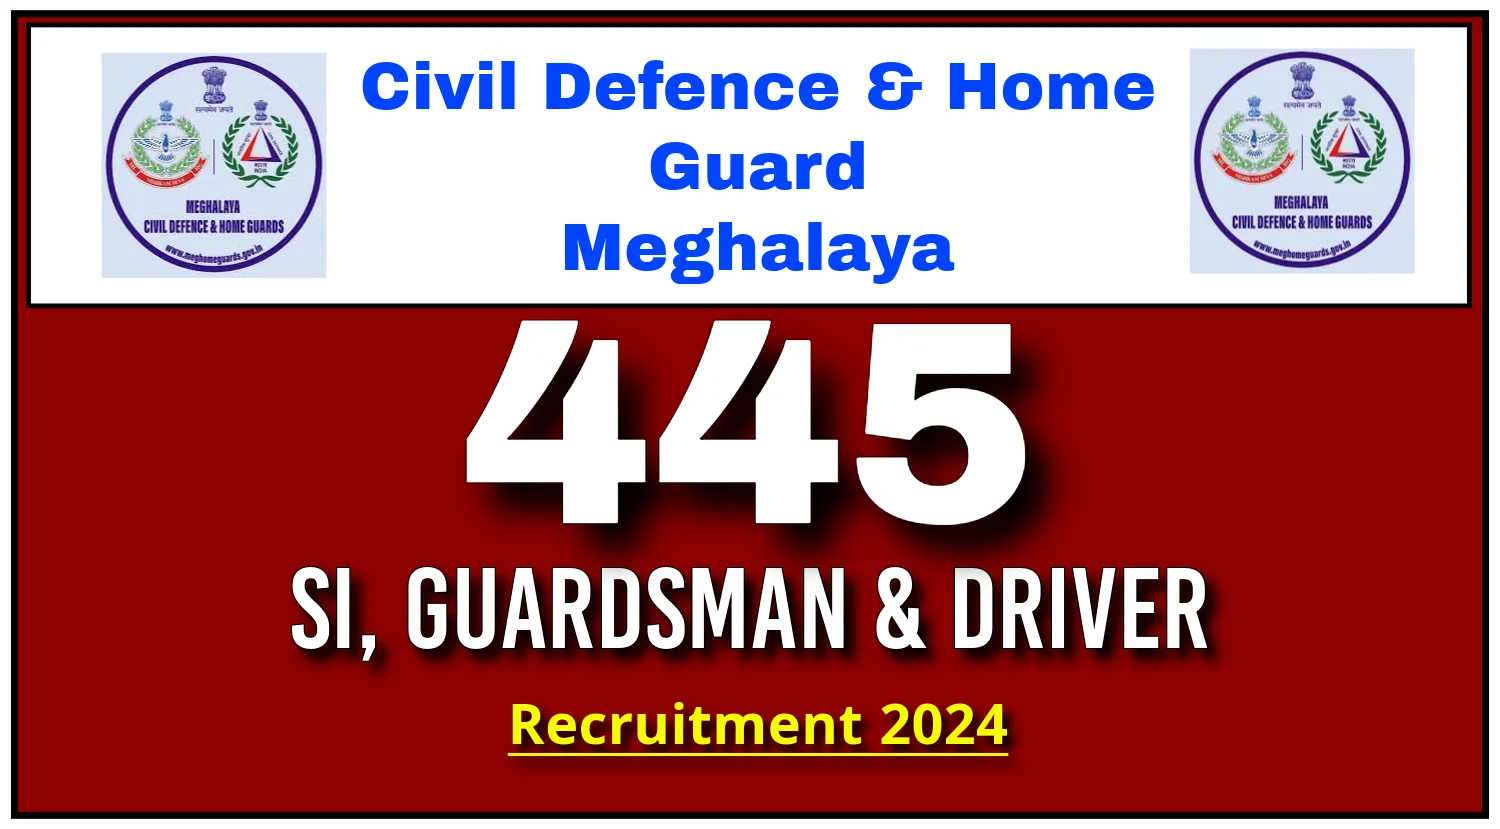 Civil Defence and Home Guard Meghalaya Recruitment 2024 for 445 Posts of SI, Guardsman & Driver Other